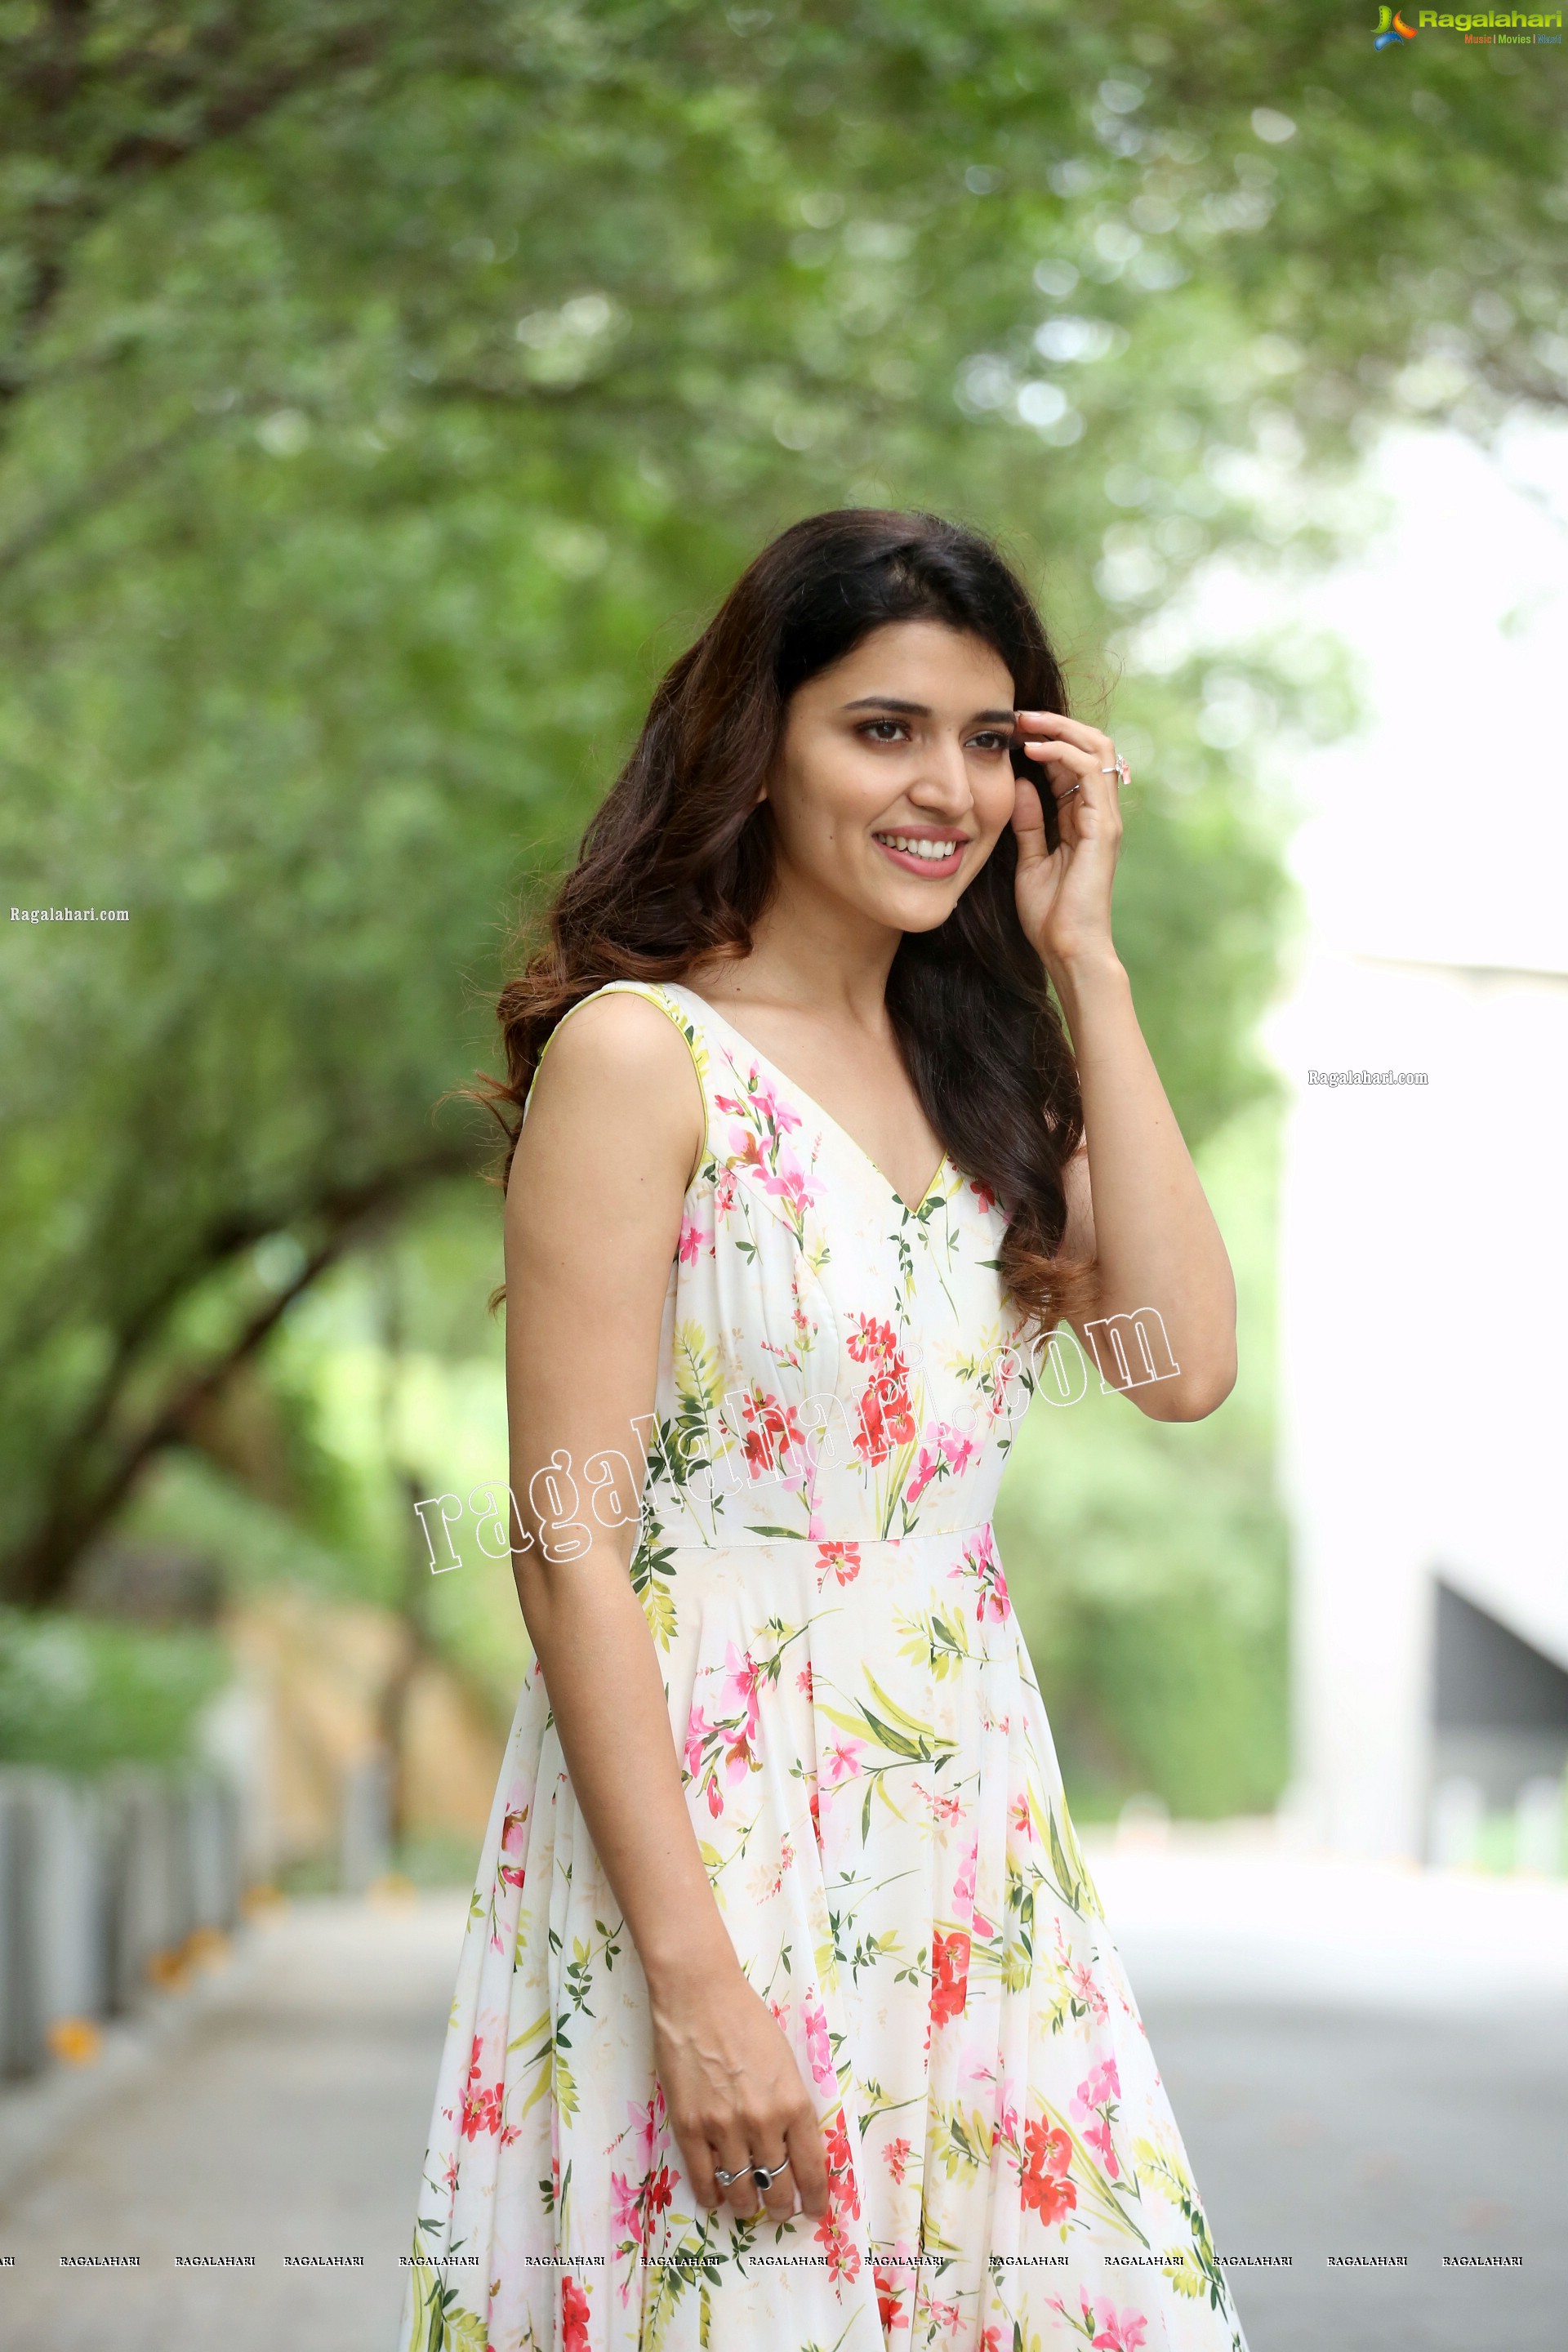 Chitra Shukla in White Floral Dress, Exclusive Photoshoot